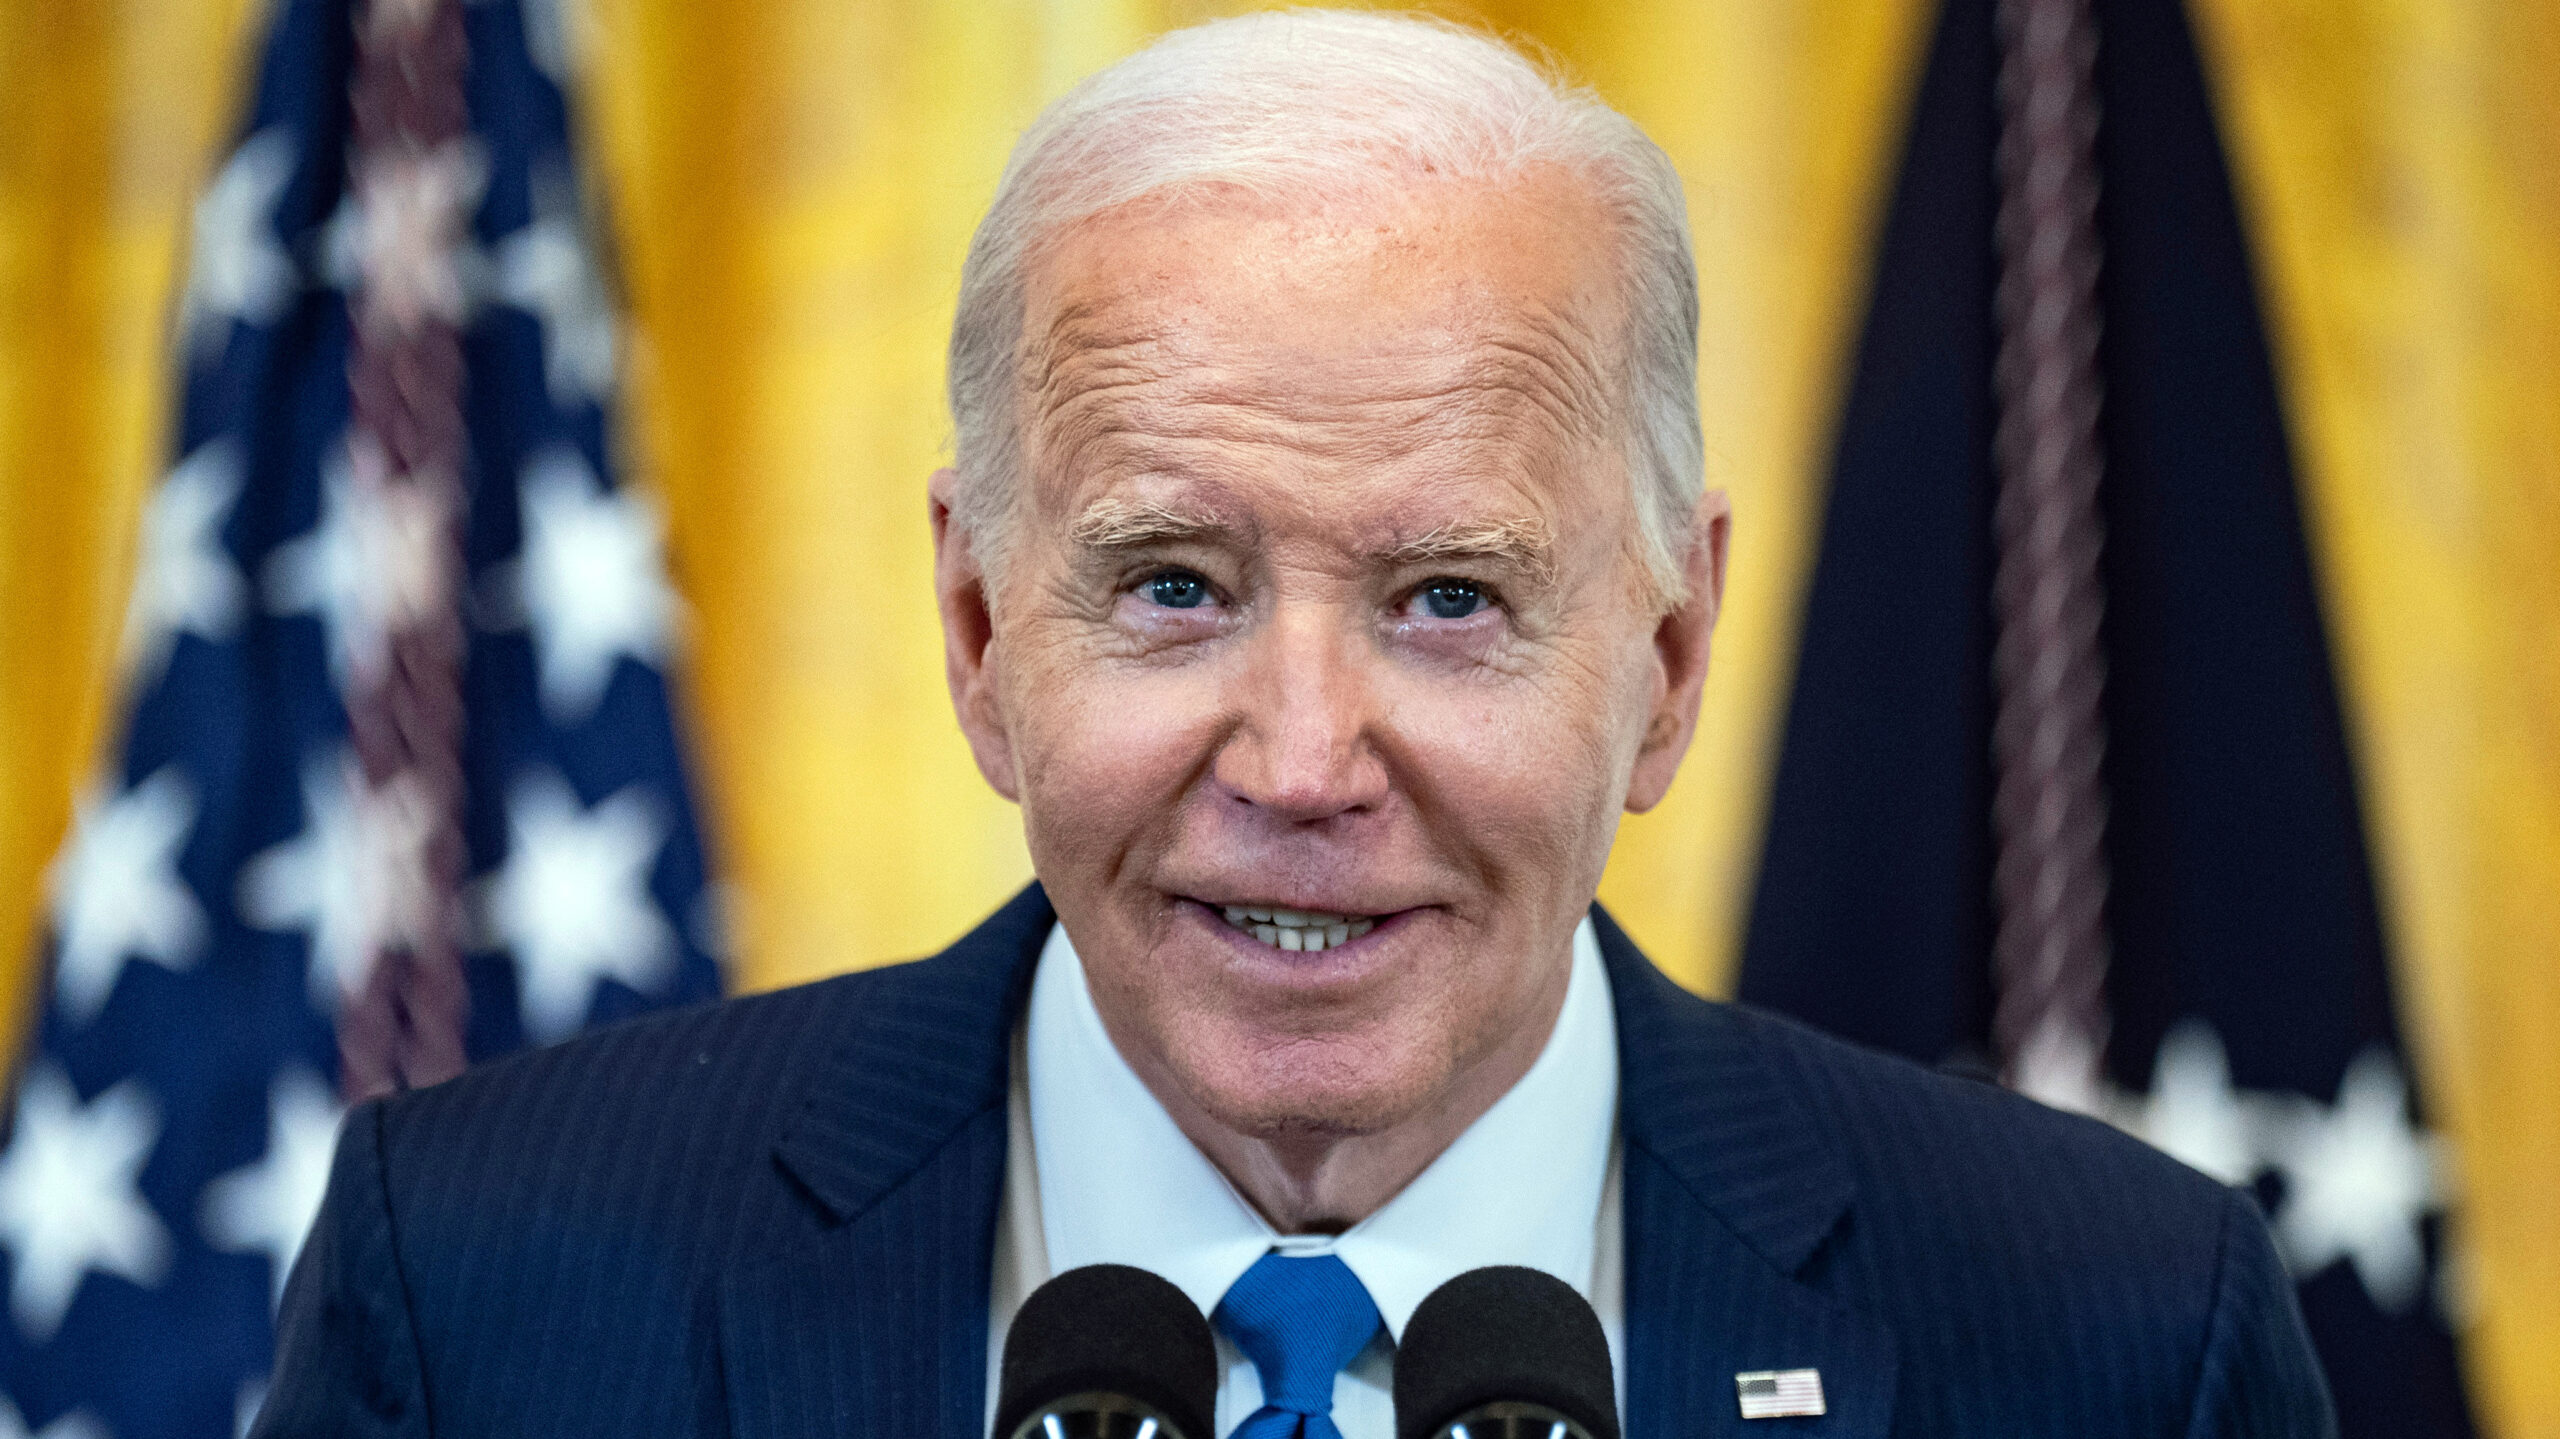 Internet users express strong opposition to Biden’s declaration of Easter as ‘Trans Day of Visibility